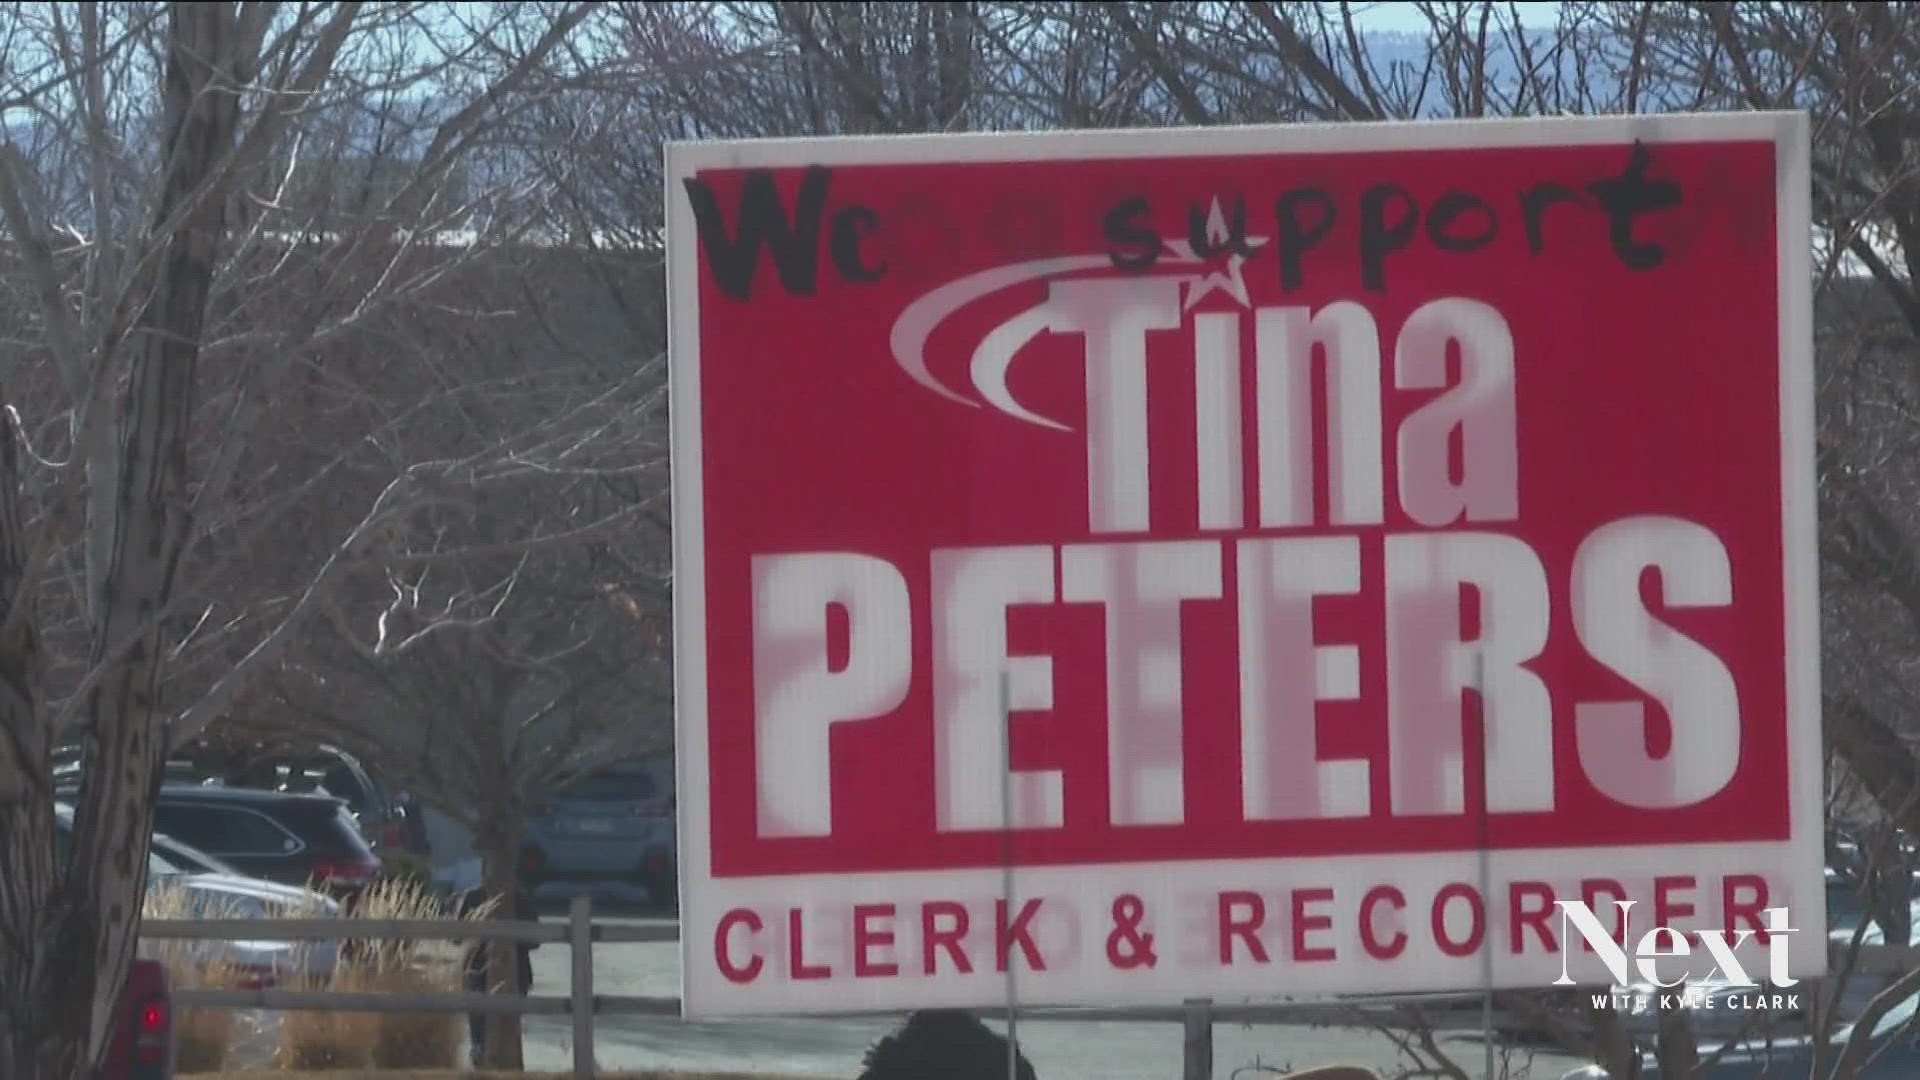 She's running to oversee Colorado's elections, but Tina Peters will not be allowed to run elections in Mesa County, where she's the clerk.